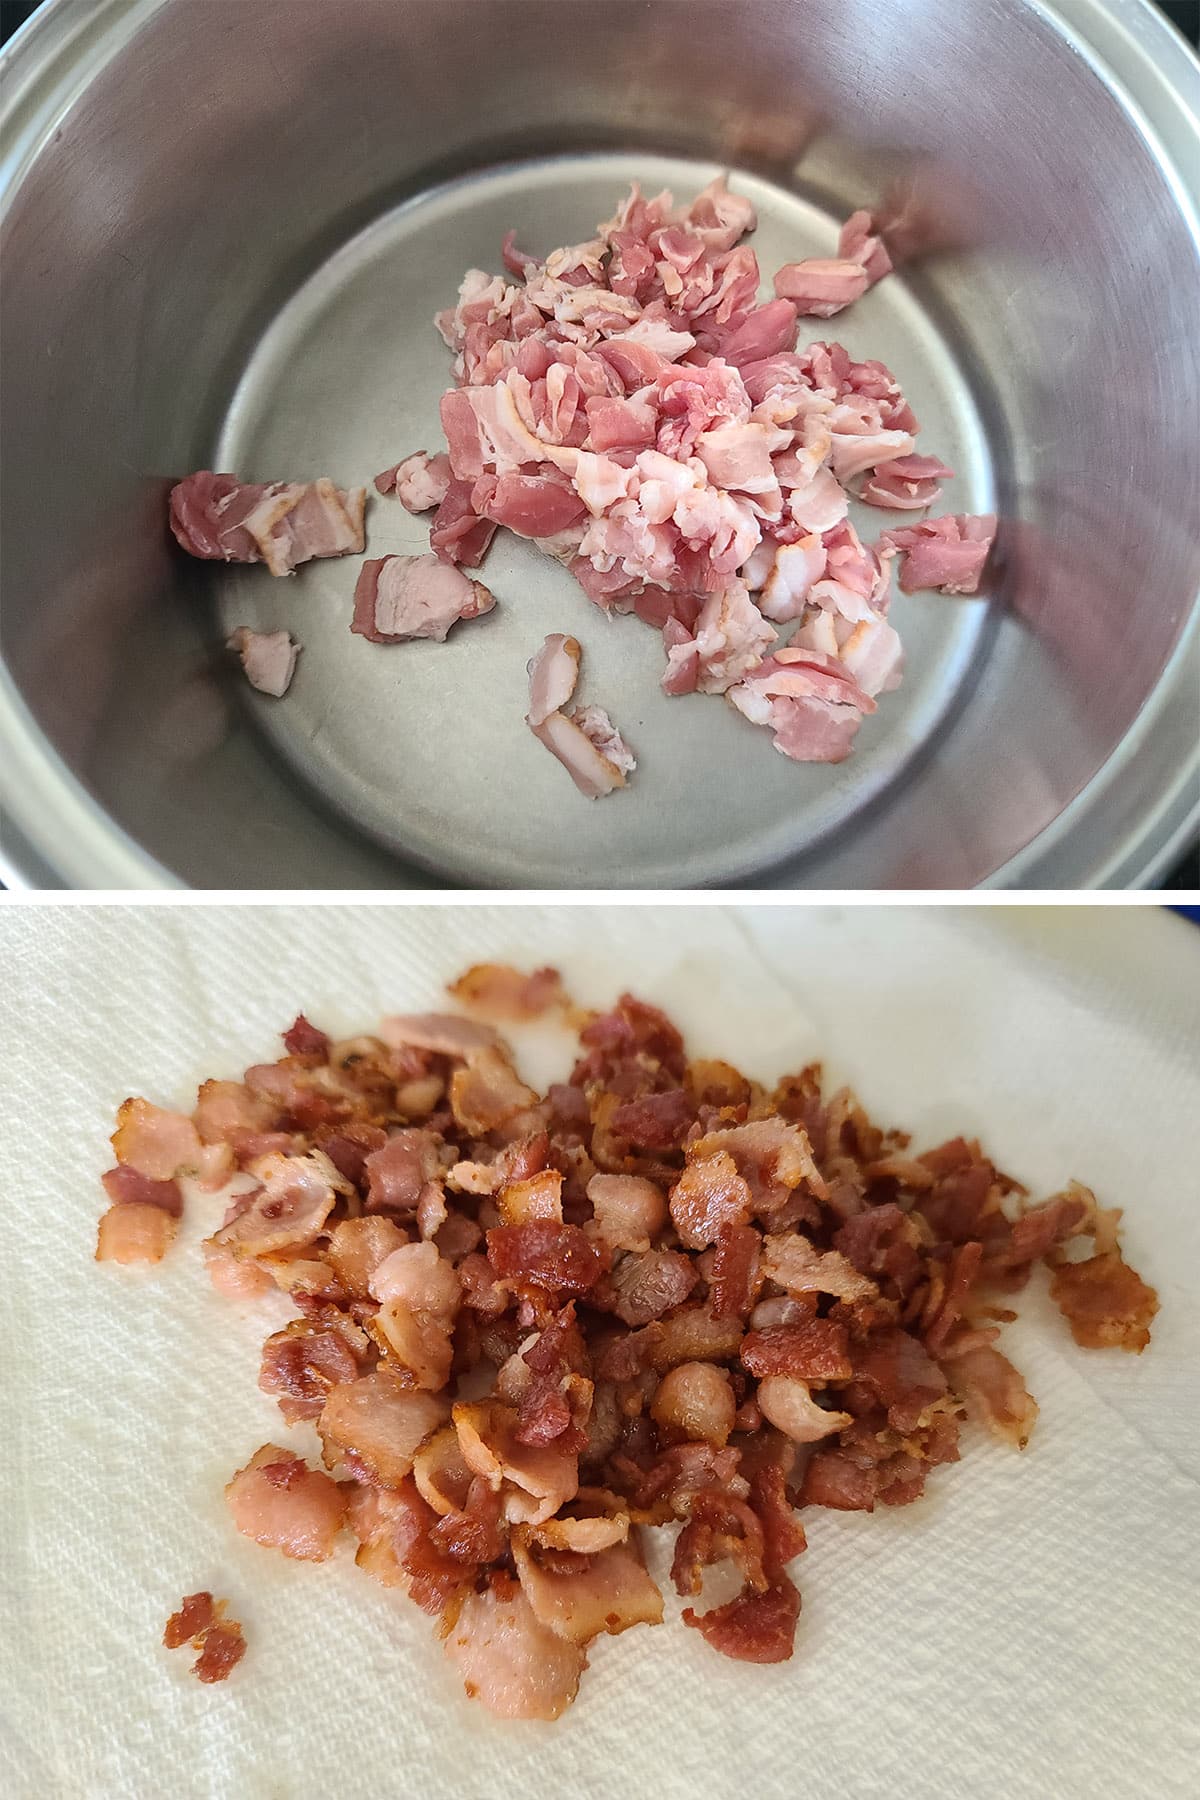 A 2 part image showing chopped raw bacon in a pan, and the cooked bacon on paper towel.